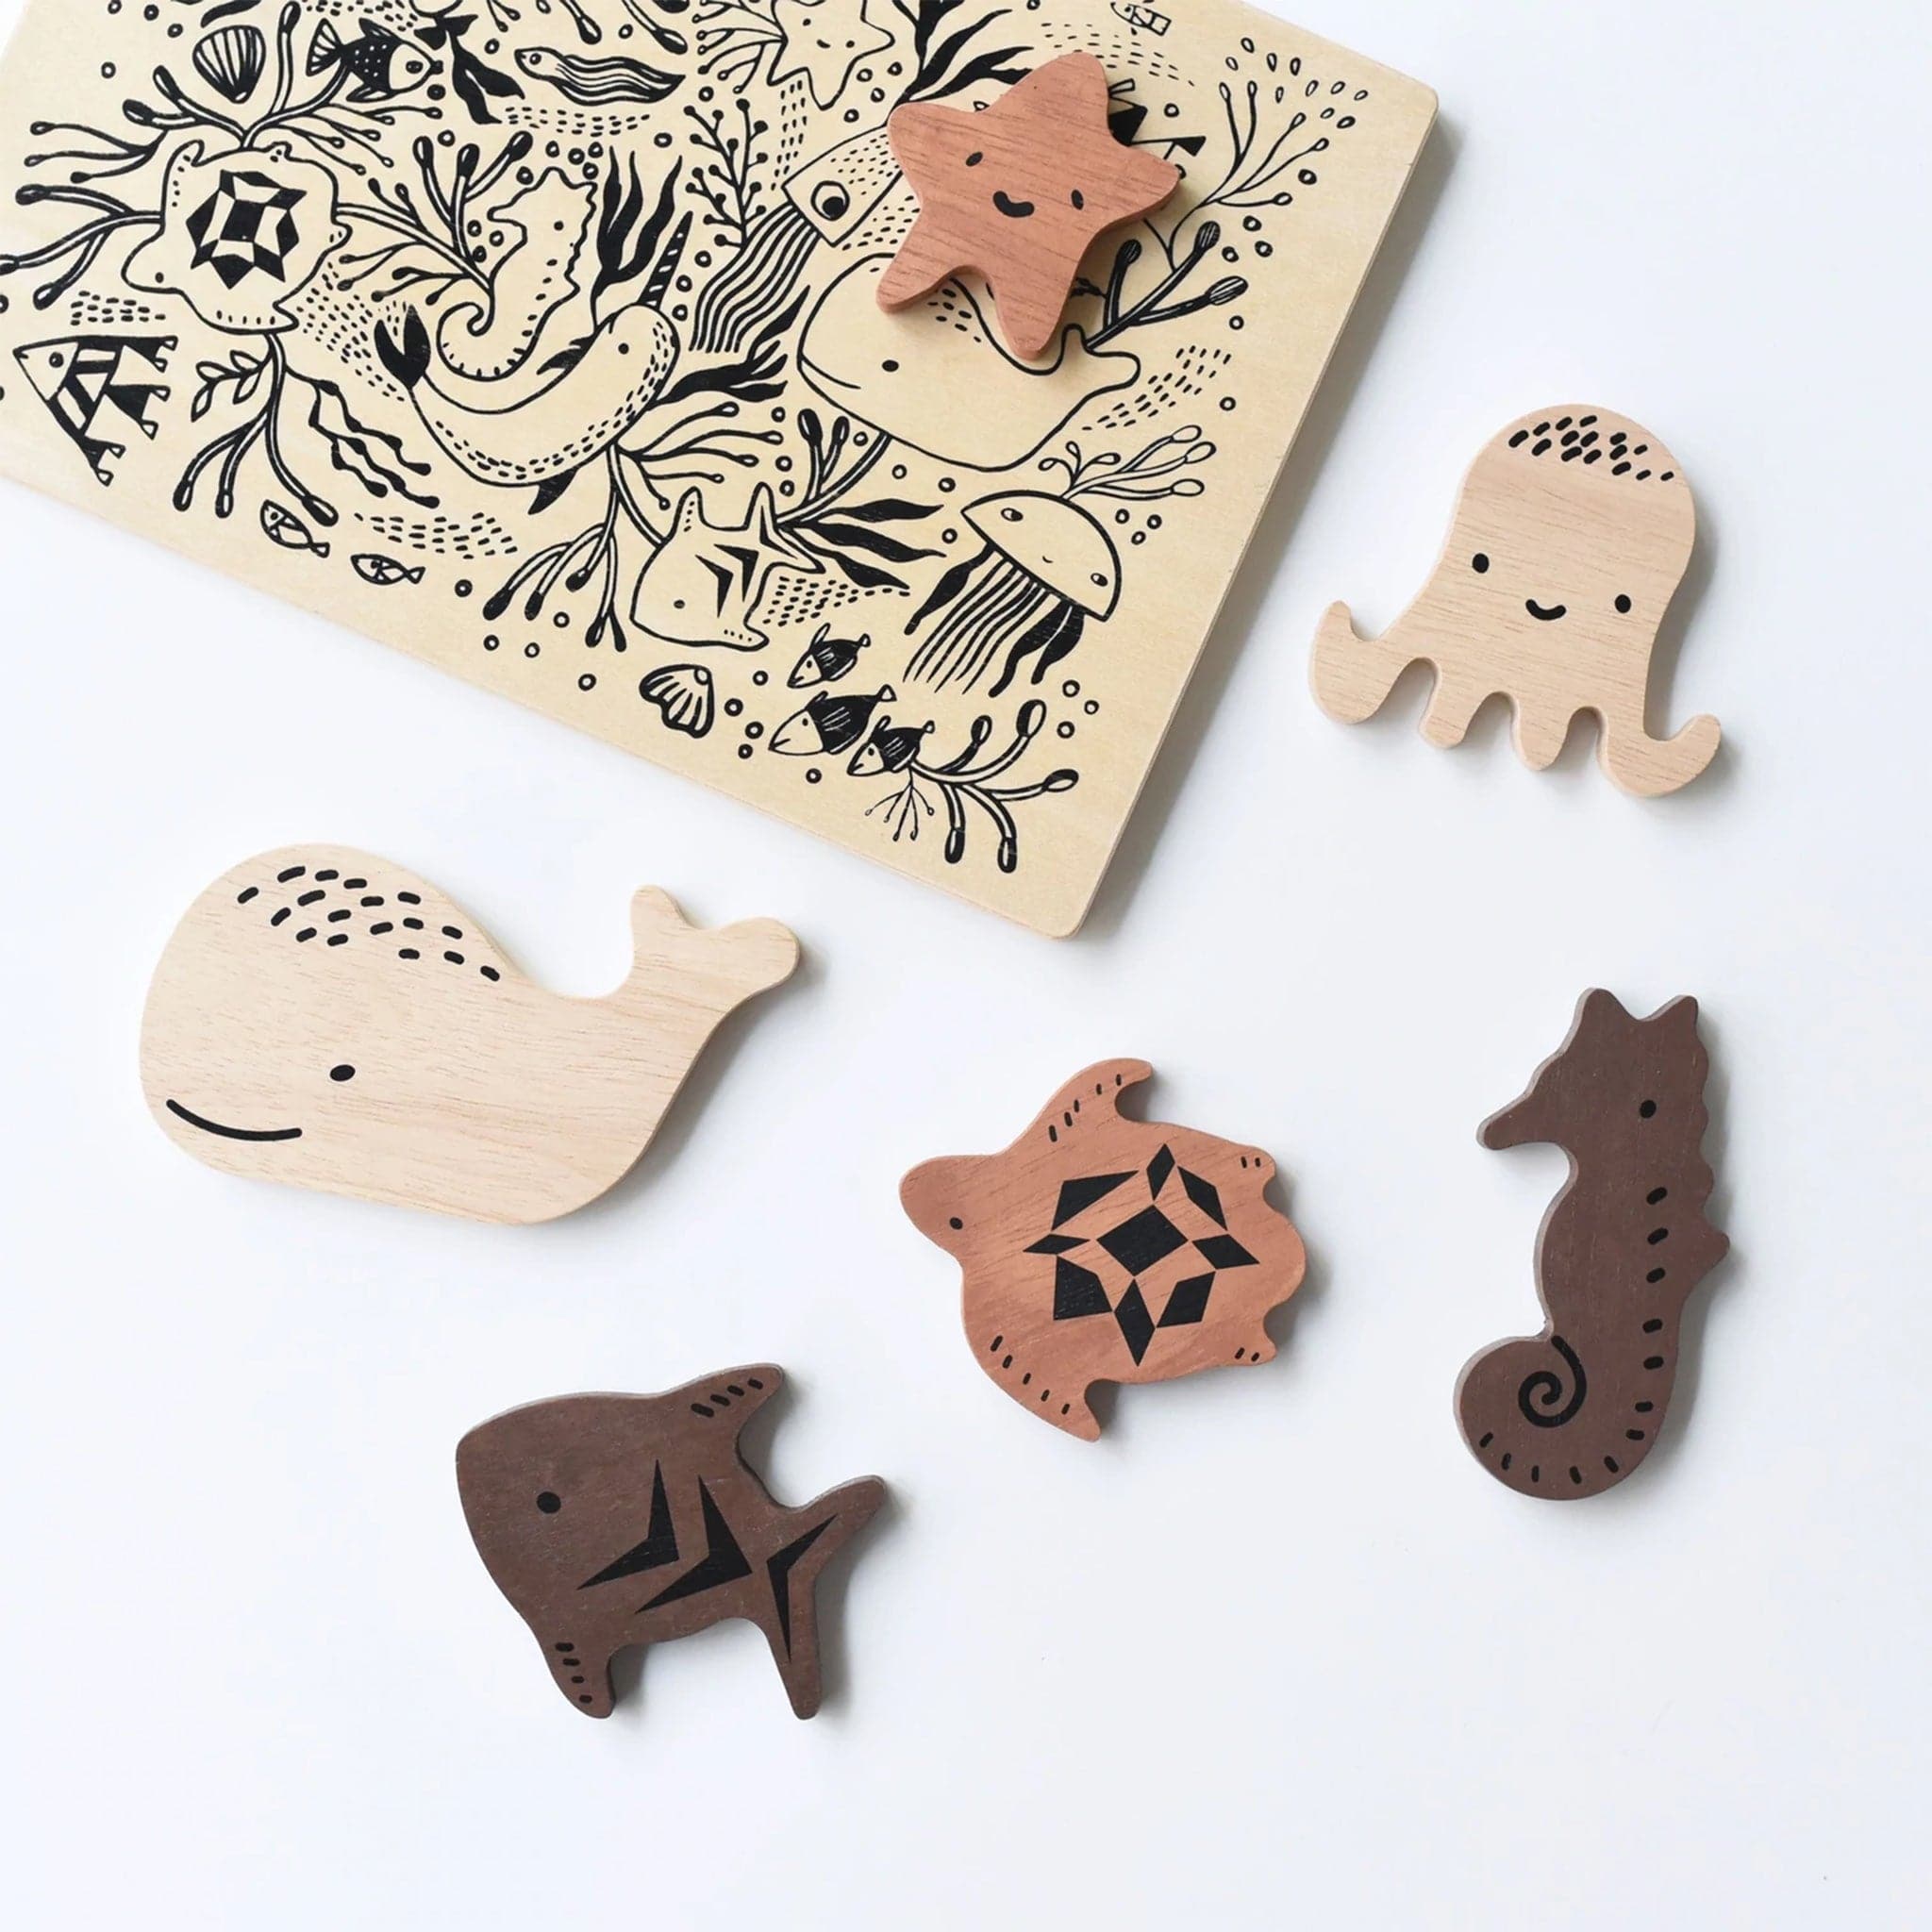 Sweet sea creatures scattered around their puzzle board. There is a starfish, octopus, sea horse, turtle, fish, and whale. Each puzzle piece is wooden and a different color wood. On the back on the puzzle is an adorable sea illustration with a plethora of sea wildlife.